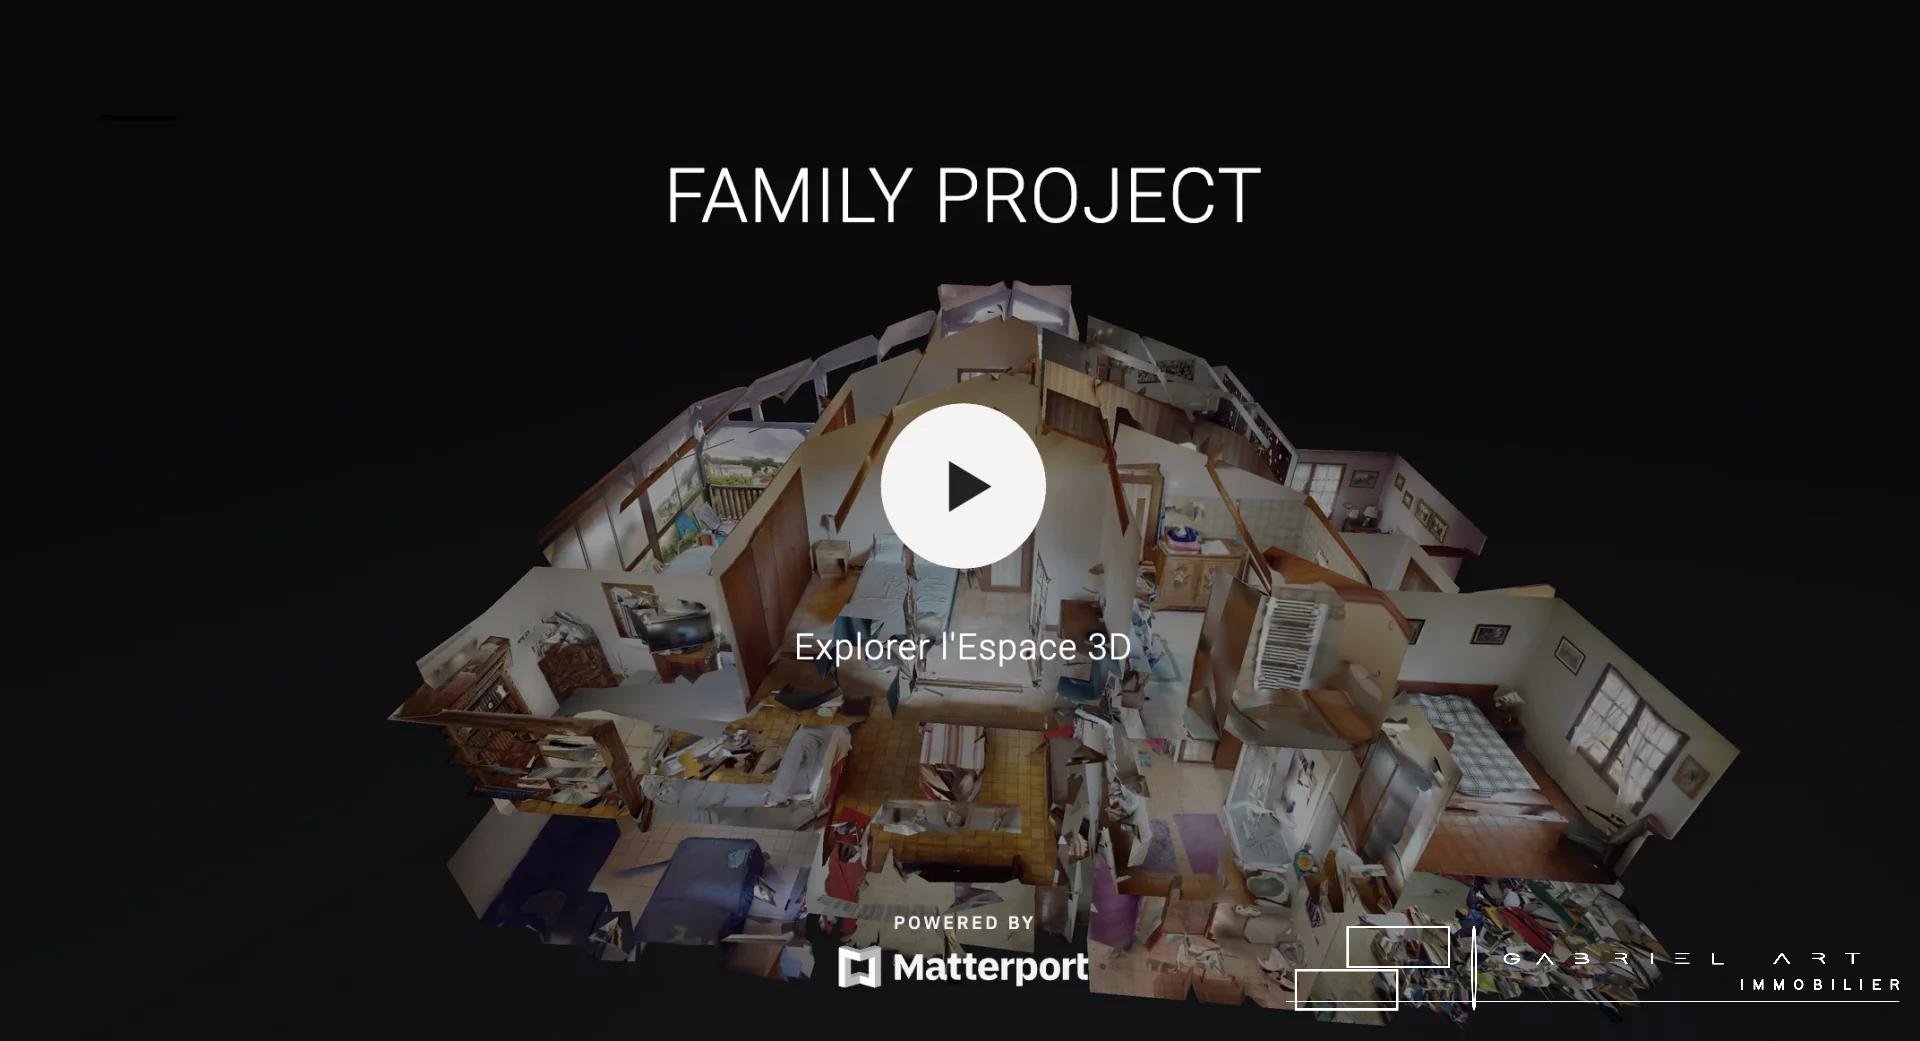 FAMILY PROJECT